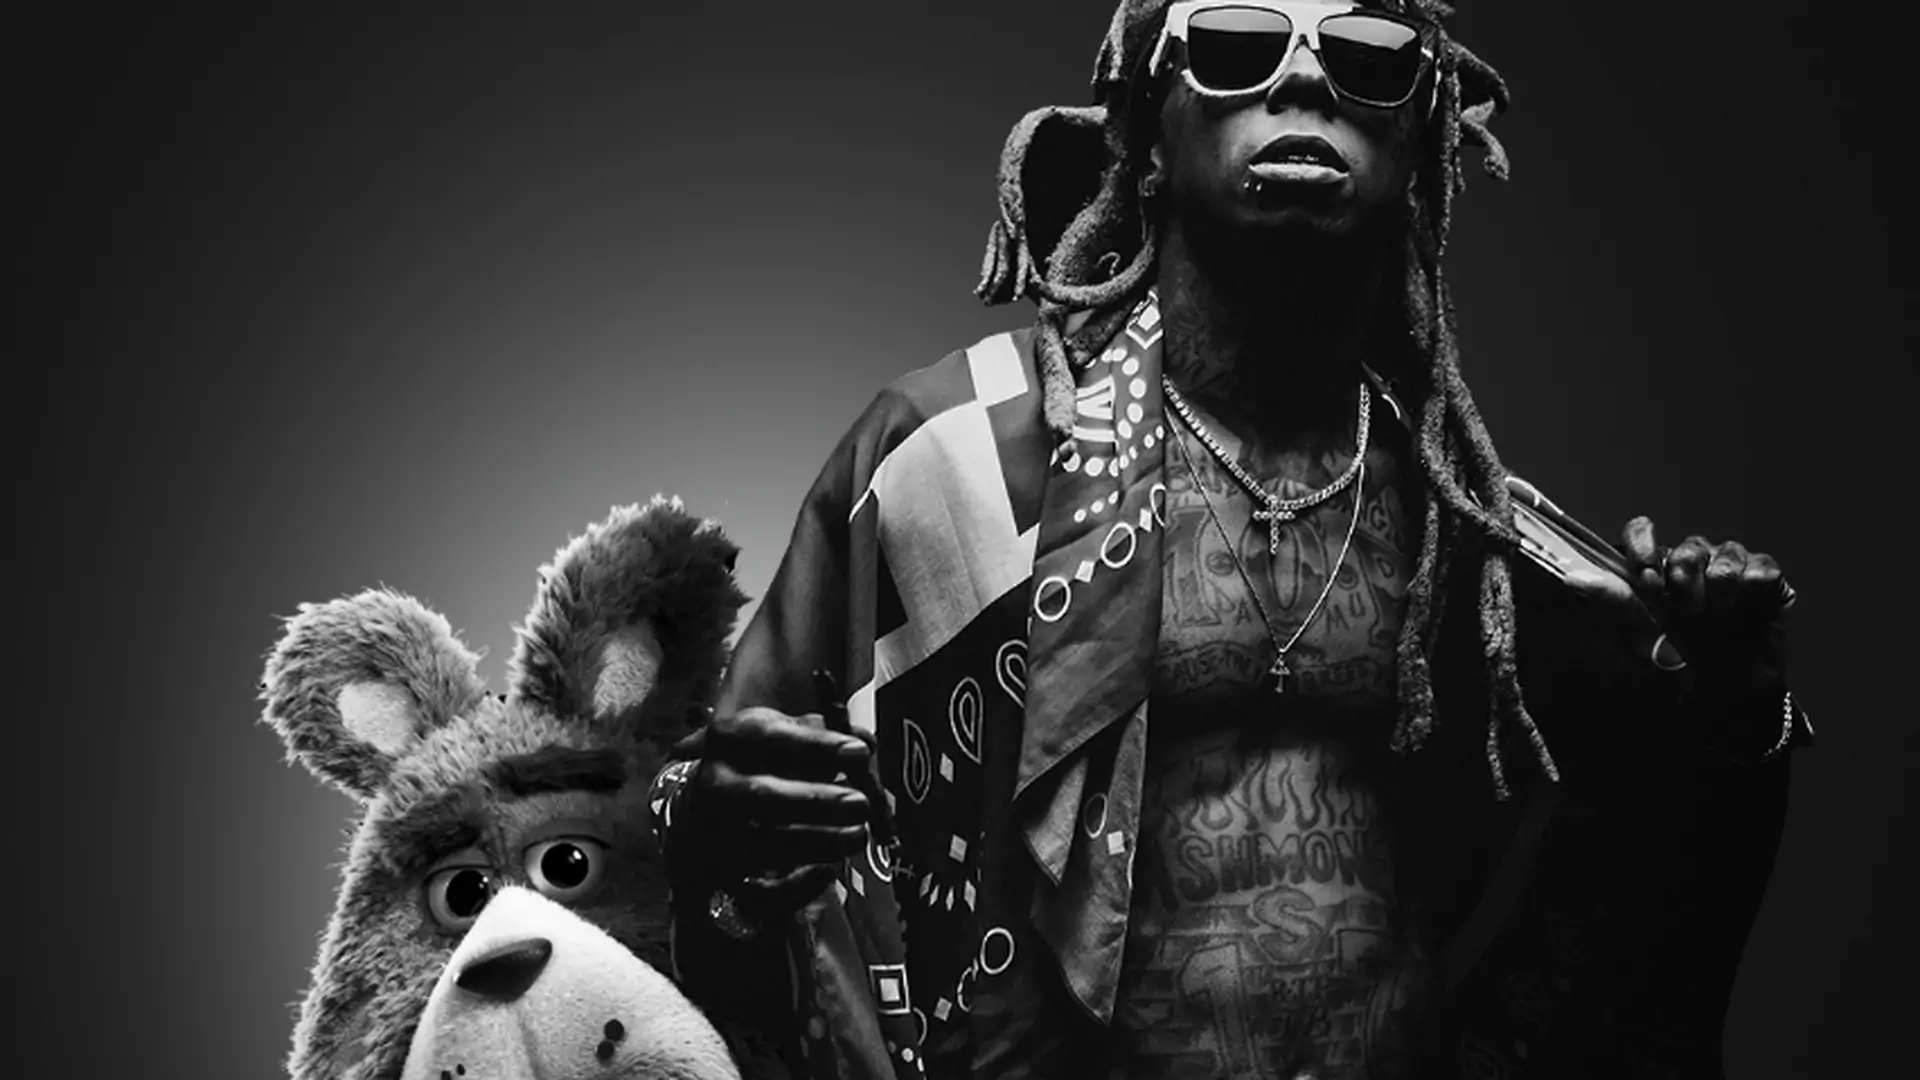 Lil Wayne: Plush is my brother from another mother!